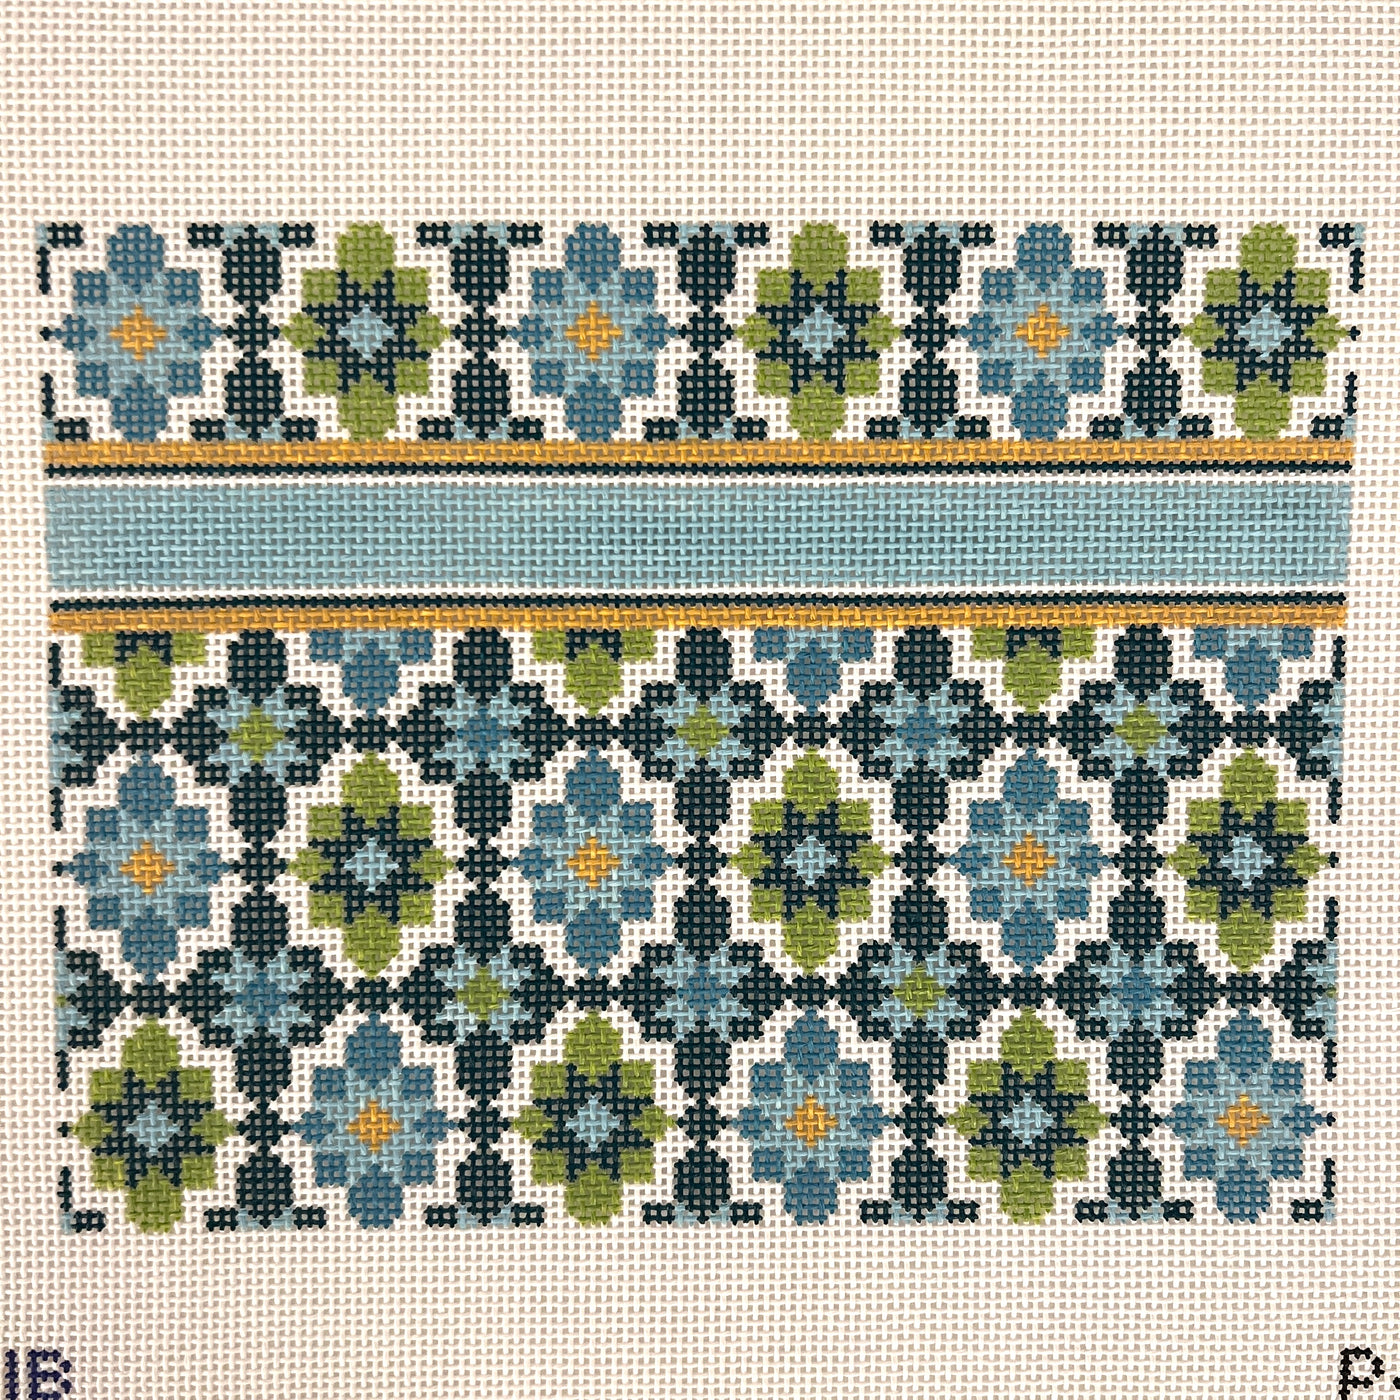 Turquoise Portugese Tile Clutch Needlepoint Canvas